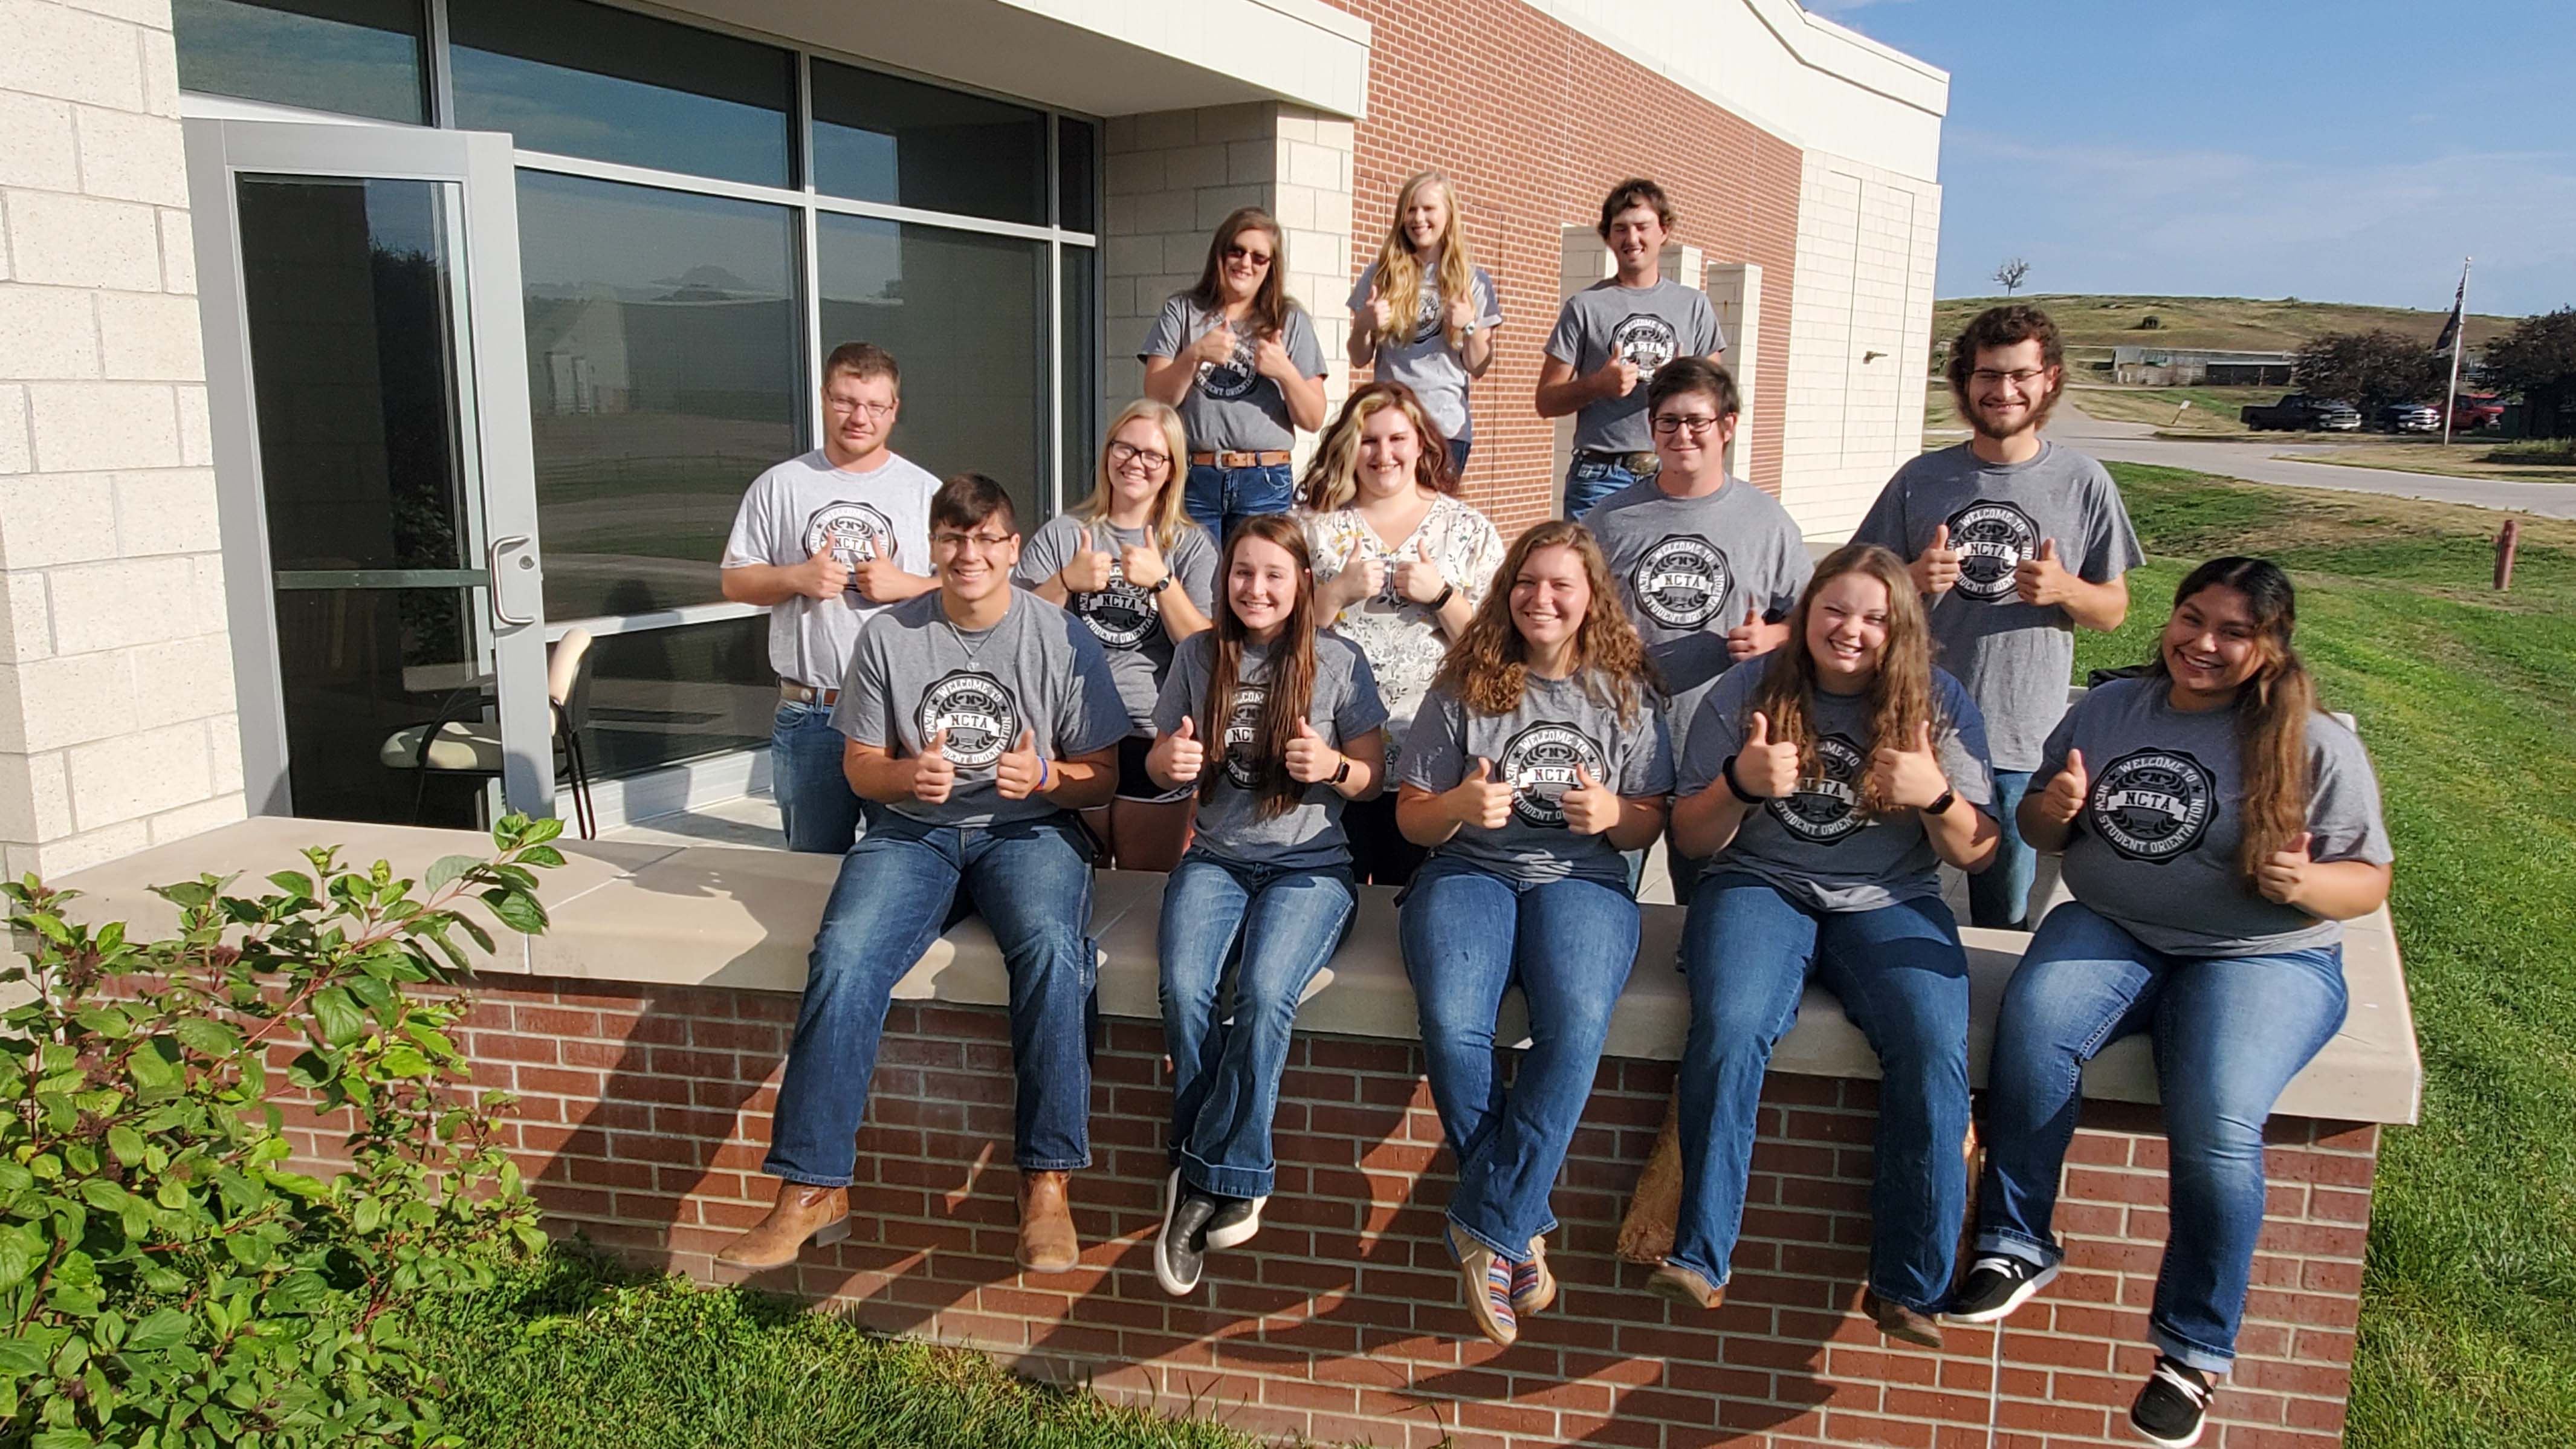 Resident assistants at the Nebraska College of Technical Agriculture are student staff at three residence halls. This group welcomed Aggies last year. In person classes begin August 23 in Curtis. (M. Crawford / NCTA News) 